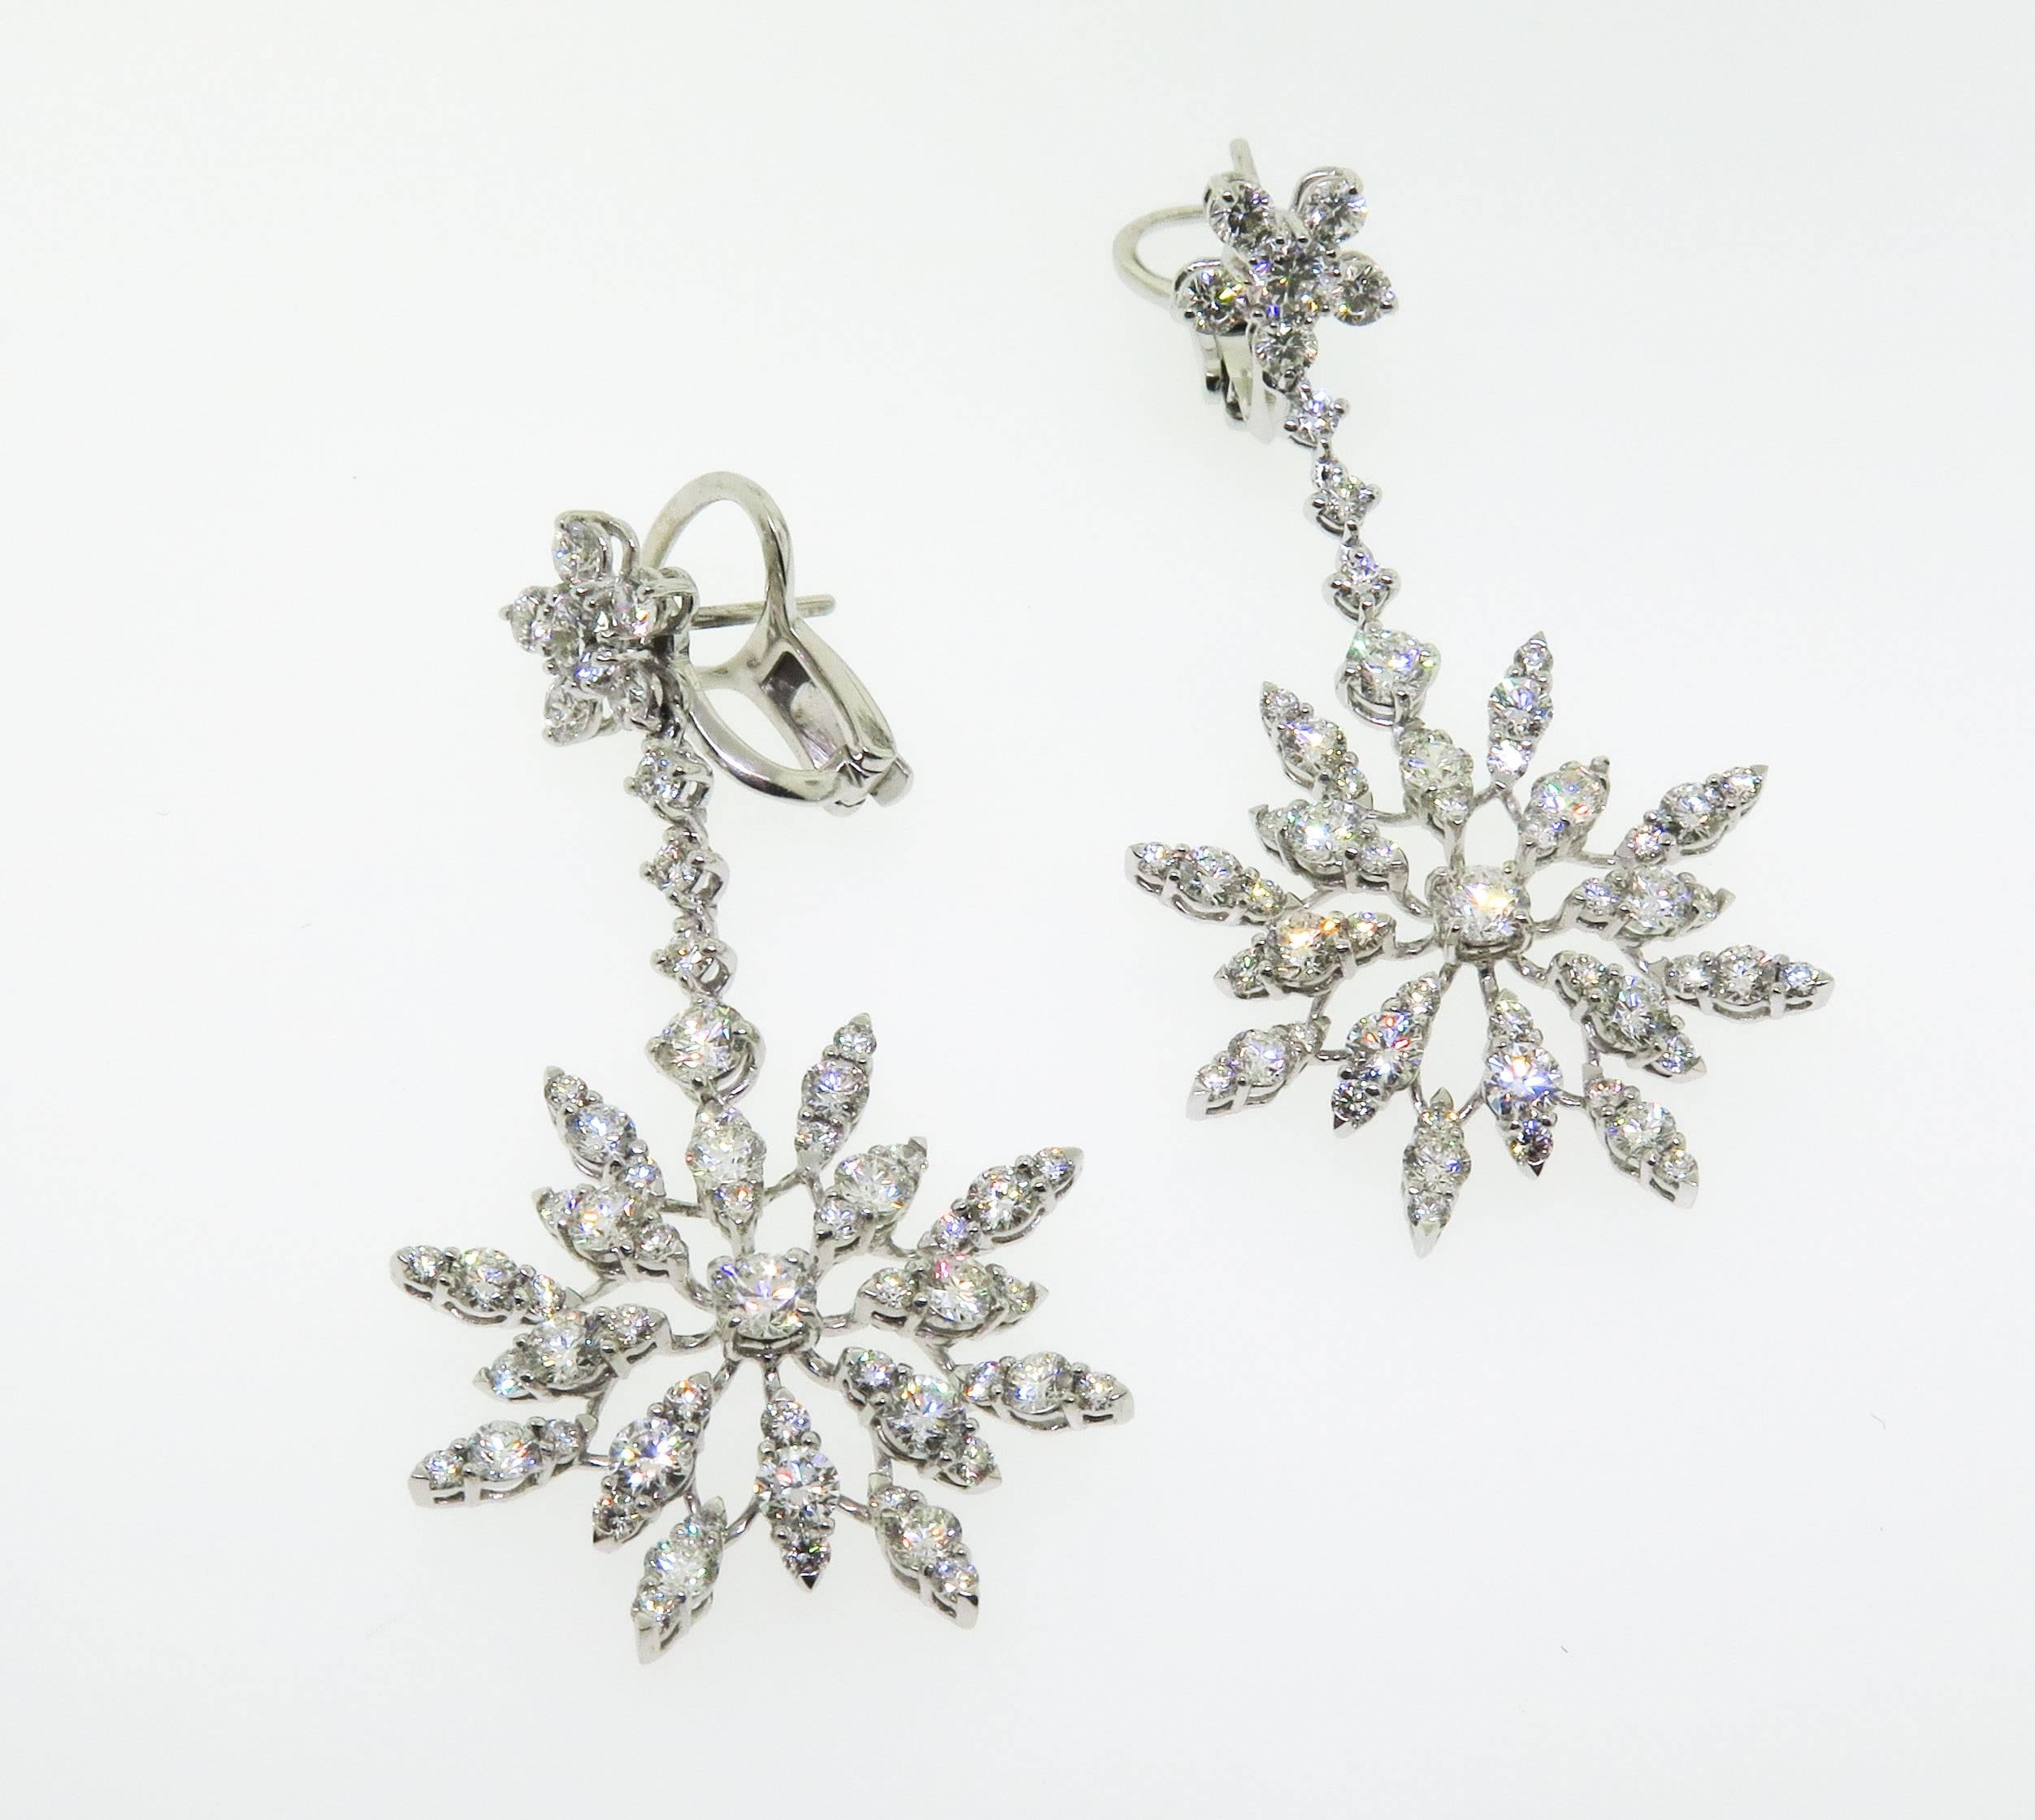 Swinging ultra-sparklers!
This beautiful pair of 18k white gold diamond earrings, centered with two stunning round shape diamonds. This look effortlessly dresses up for cocktails or a formal event.  Accentuating it with 5.78 carats of G color, VS